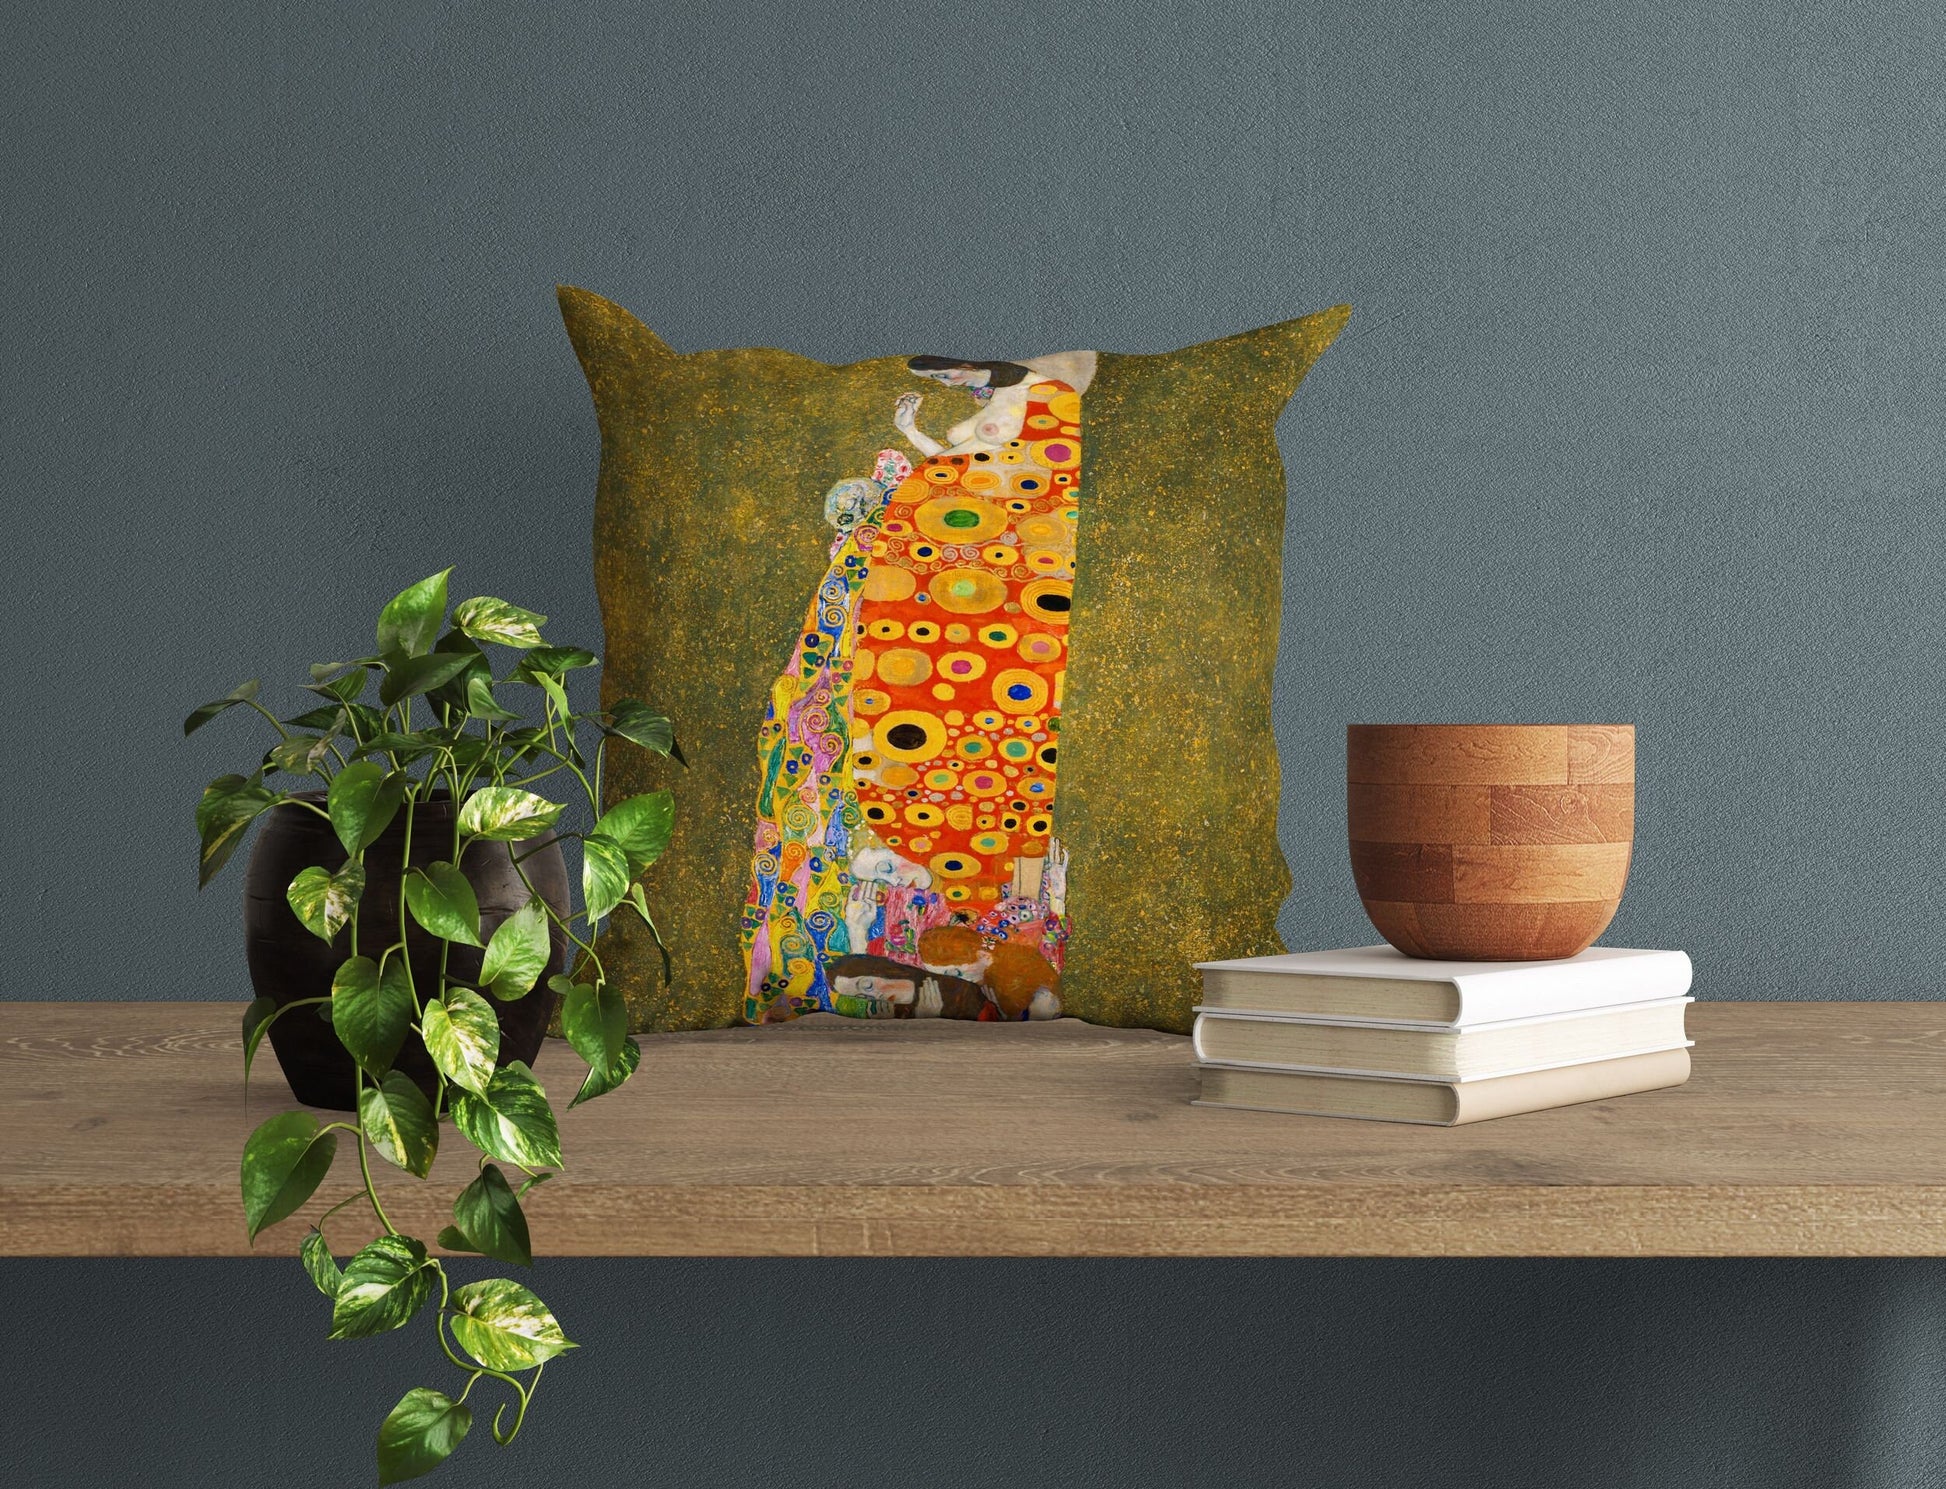 Gustav Klimt Famous Painting Hope II, Decorative Pillow, Abstract Throw Pillow Cover, Soft Pillow Cases, Bright Yellow Pillow, Modern Pillow